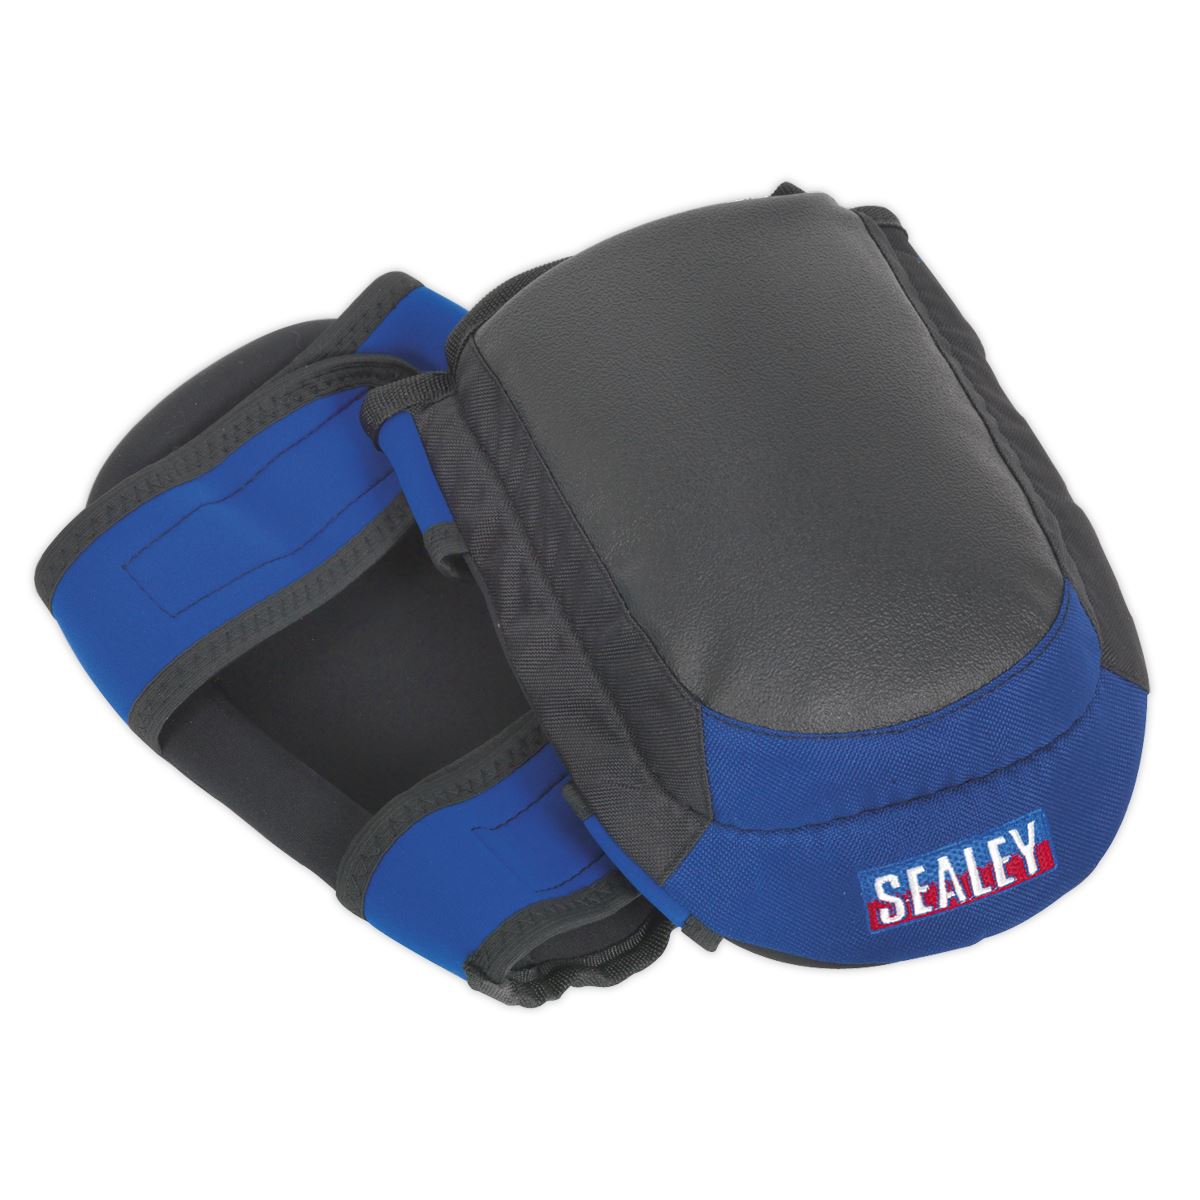 Worksafe by Sealey Heavy-Duty Double Gel Knee Pads - Pair